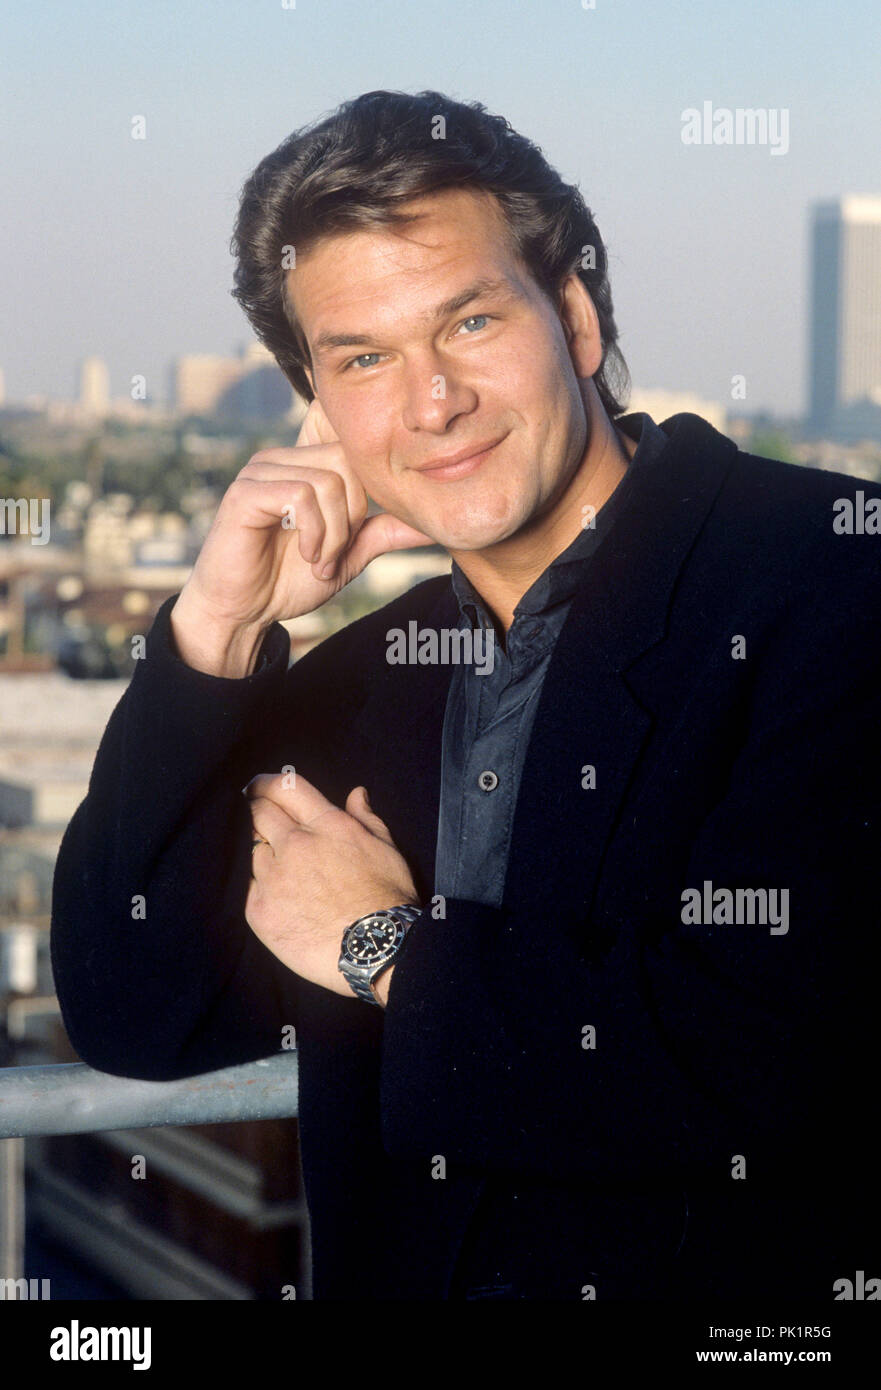 Patrick Swayze in February 1989 in Los Angeles. | usage worldwide Stock Photo